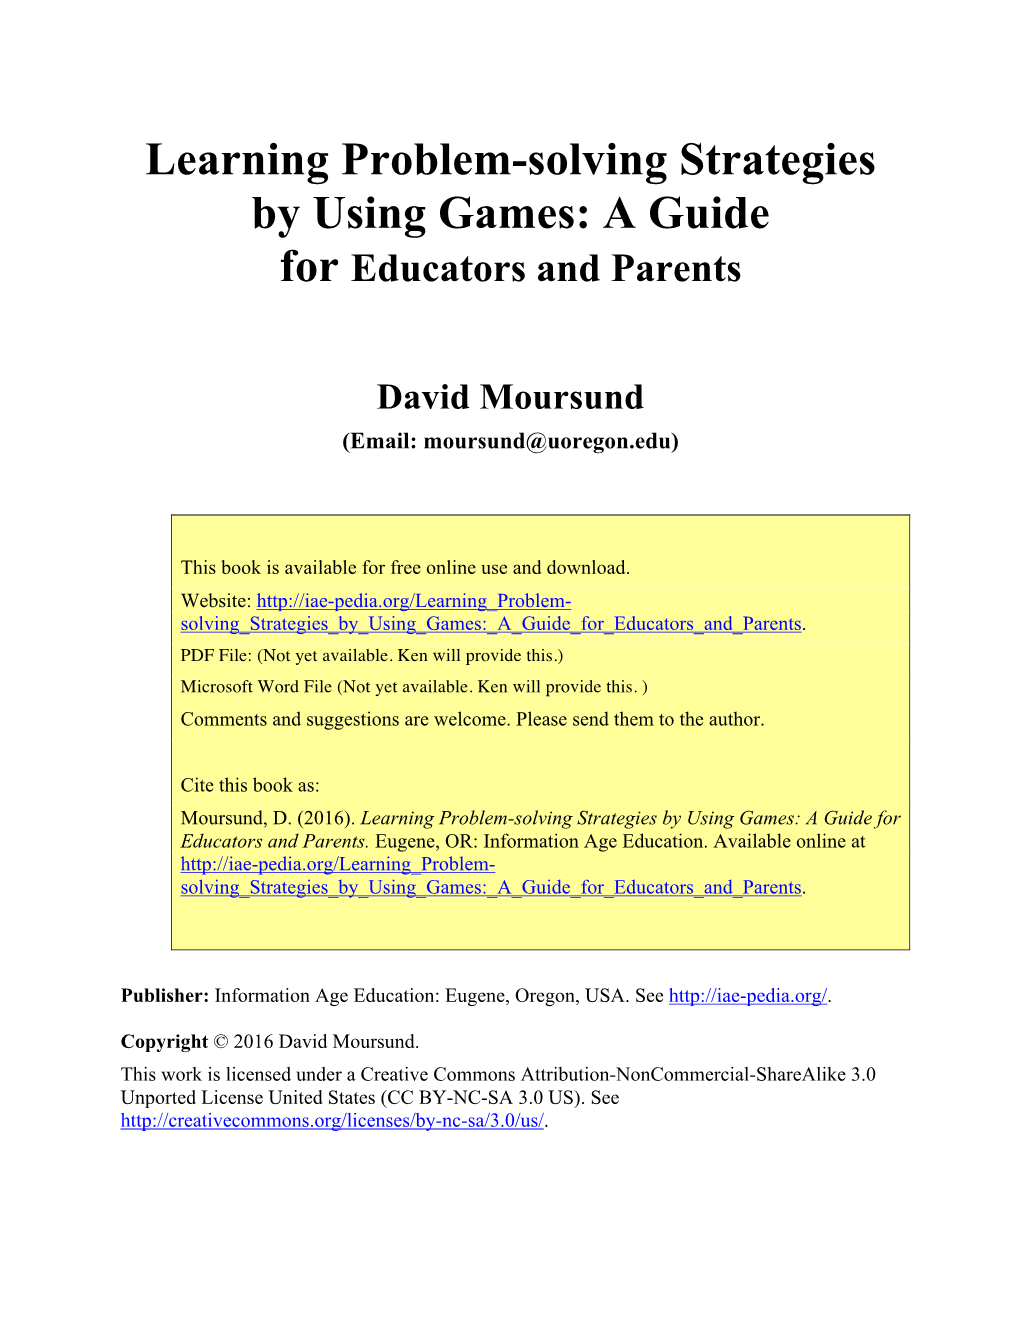 Learning Problem-Solving Strategies by Using Games: a Guide for Educators and Parents